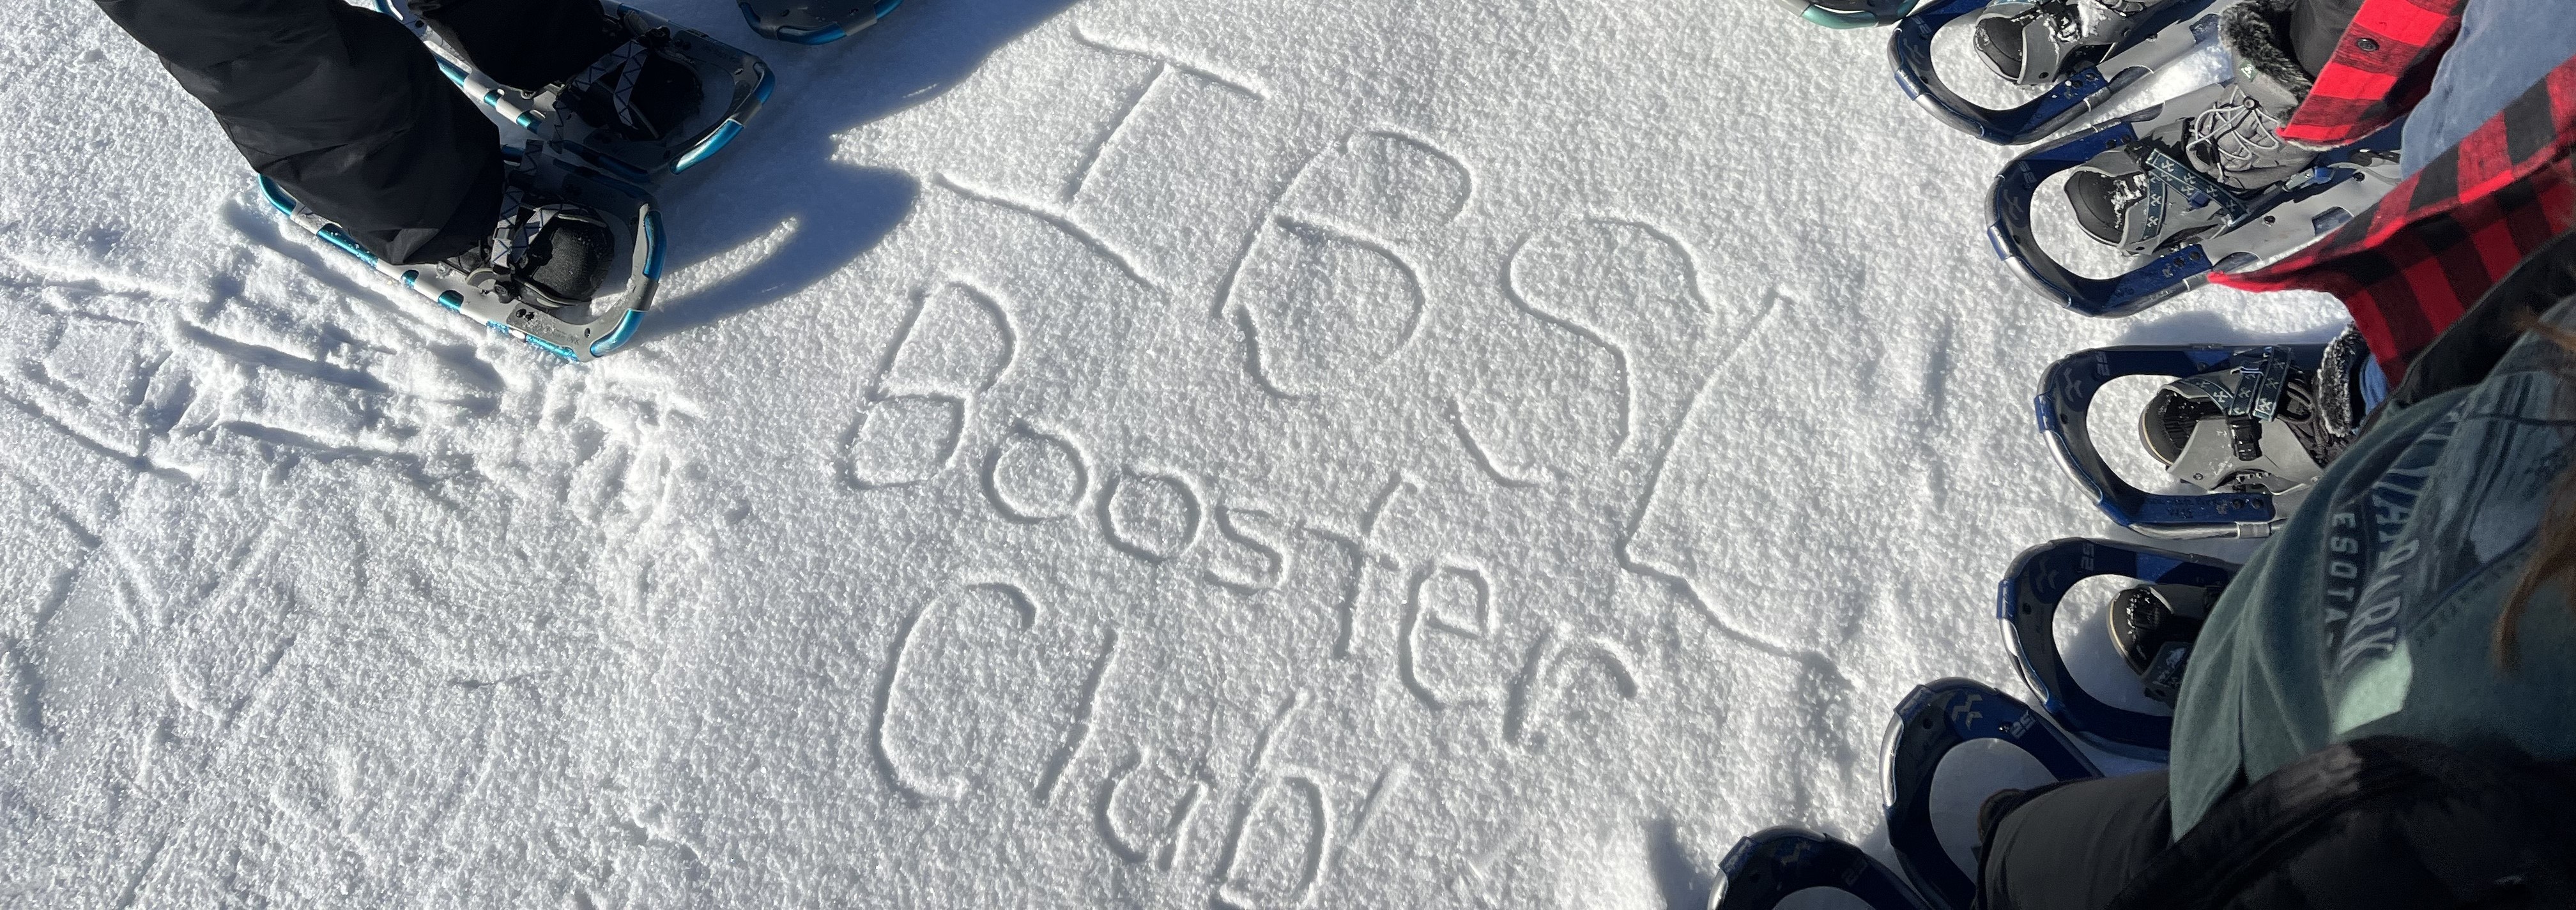 Only snowshoes visible from a group of people standing around the words "IBSL Booster Club" written in the snow.